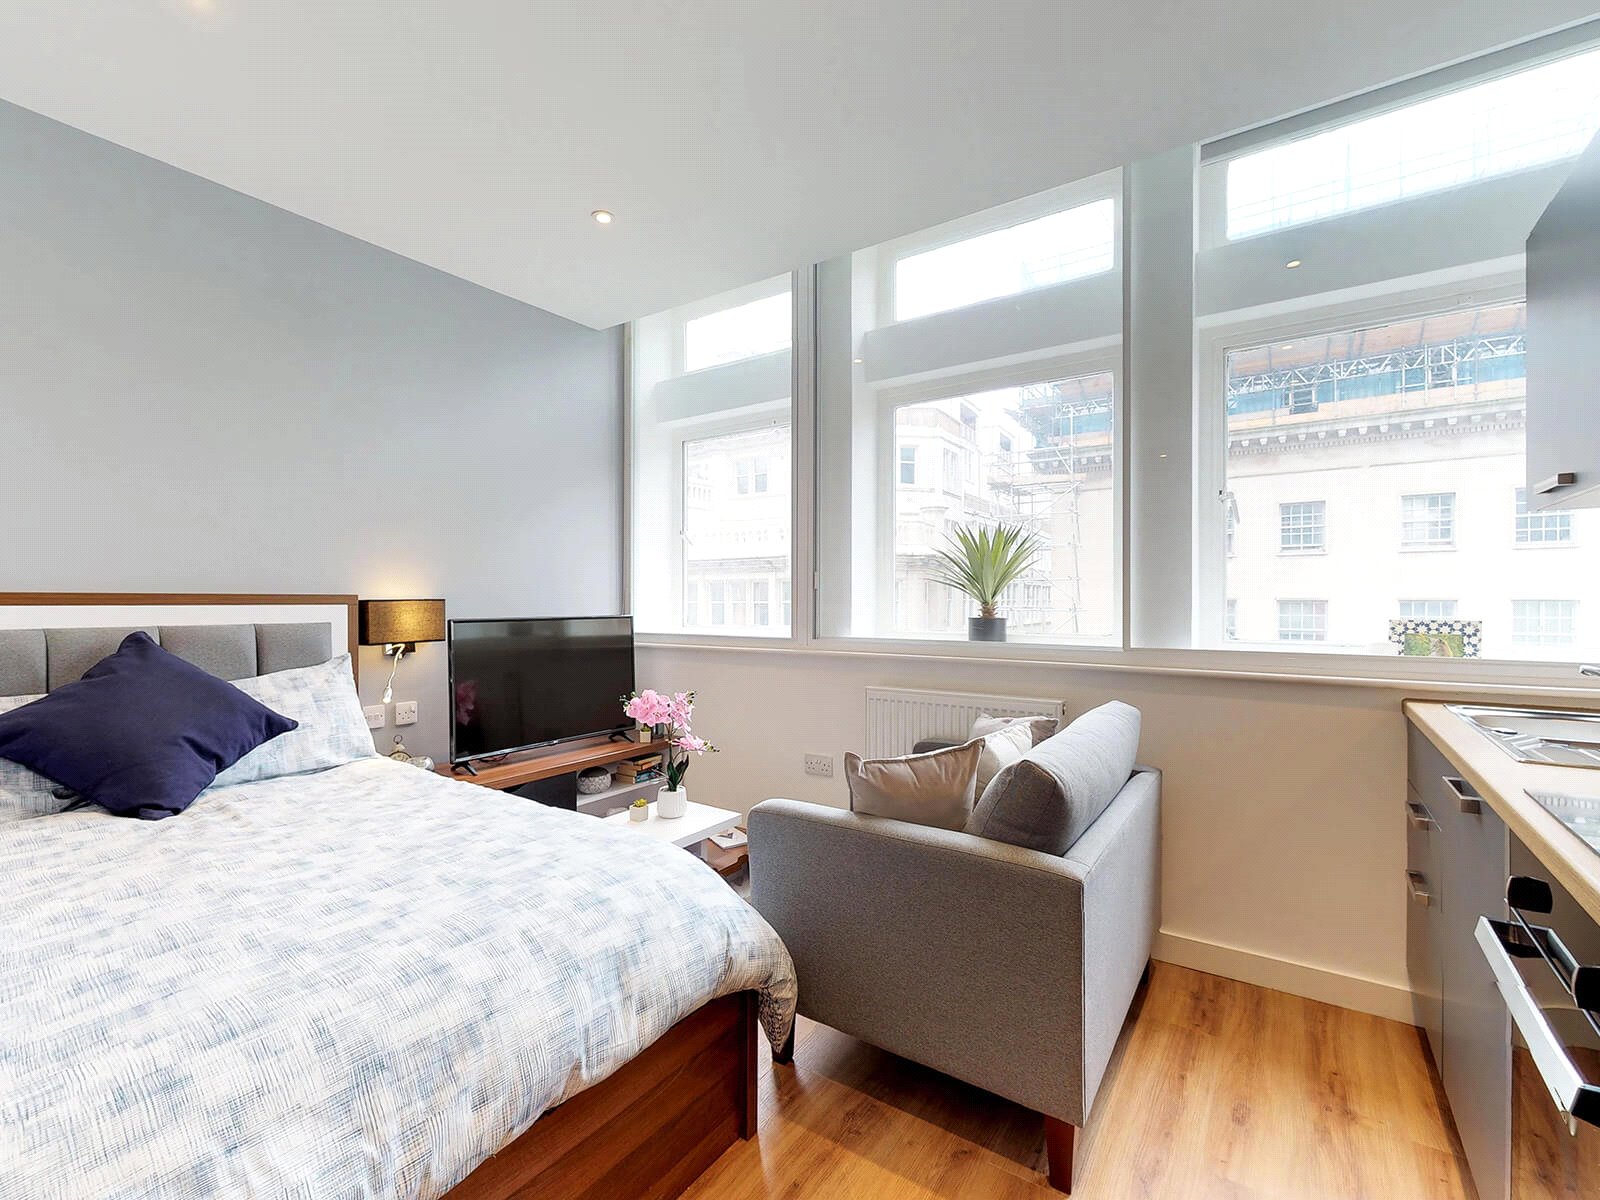 0 bed apartment for rent in Liverpool. From YPP - Sheffield